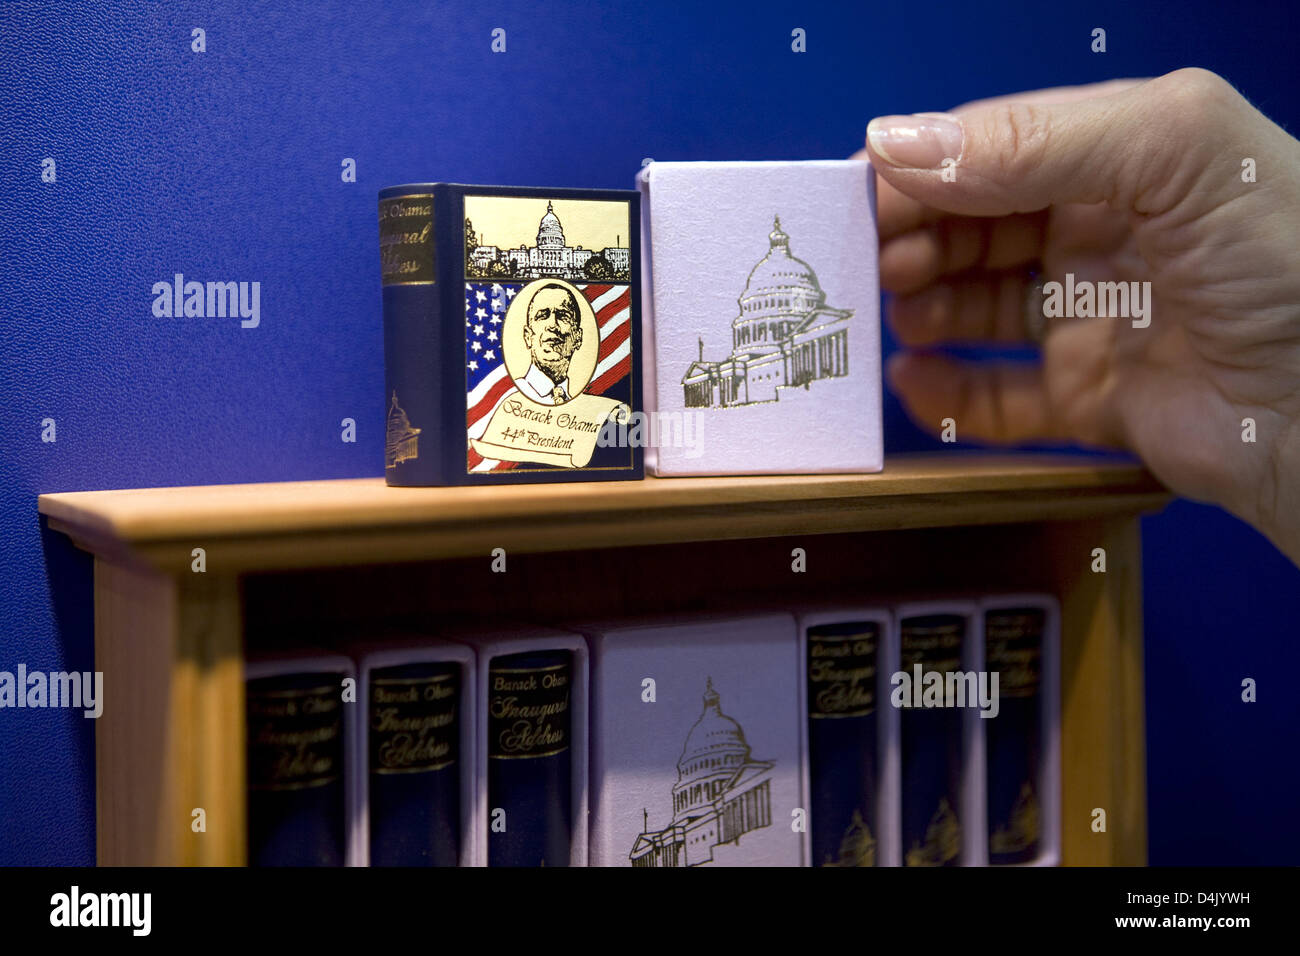 A member of staff of the miniature book publisher Leipzig presents a miniature edition of the US Constitution, the Declaration of Independence and the inaugural adress of the 44th President Barack Obama at the opening day of the Leipzig Book Fair 2009 in Leipzig, Germany, 12 March 2009. From 12 to 15 March, 2.135 exhibitors from 38 countries present novelties from the book market a Stock Photo